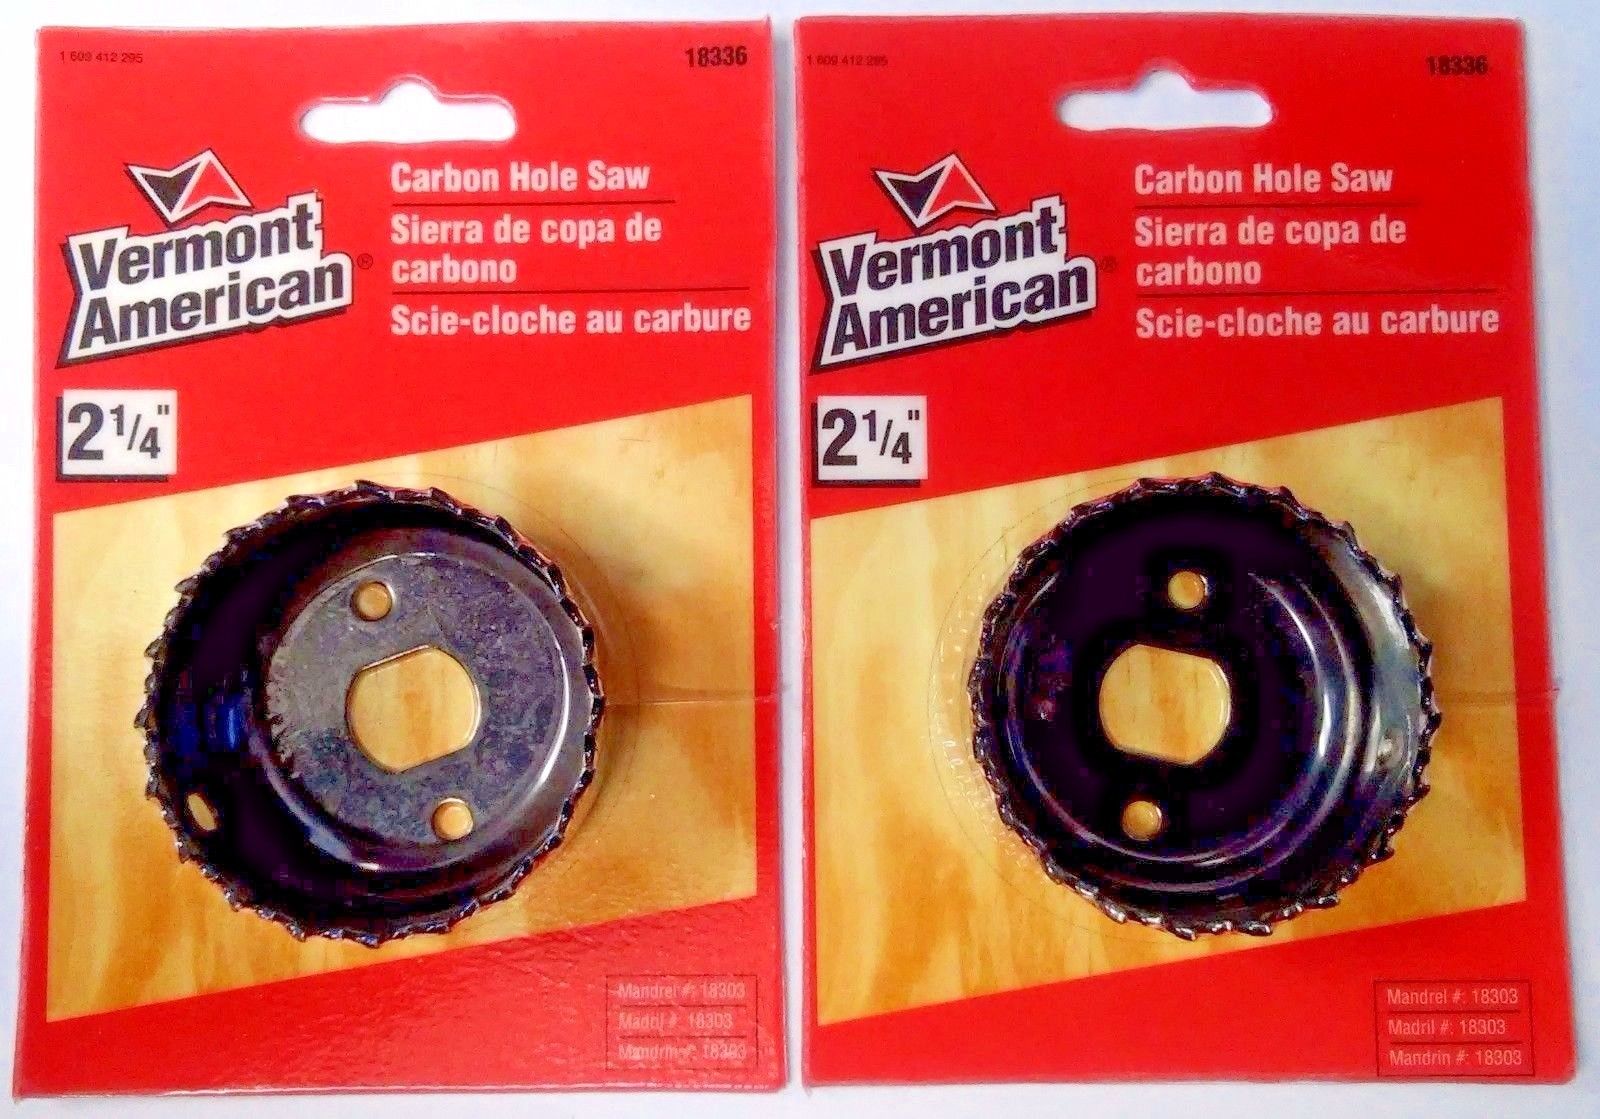 Vermont American #18336 2-1/4" Carbon Hole Saw (2 Packs)